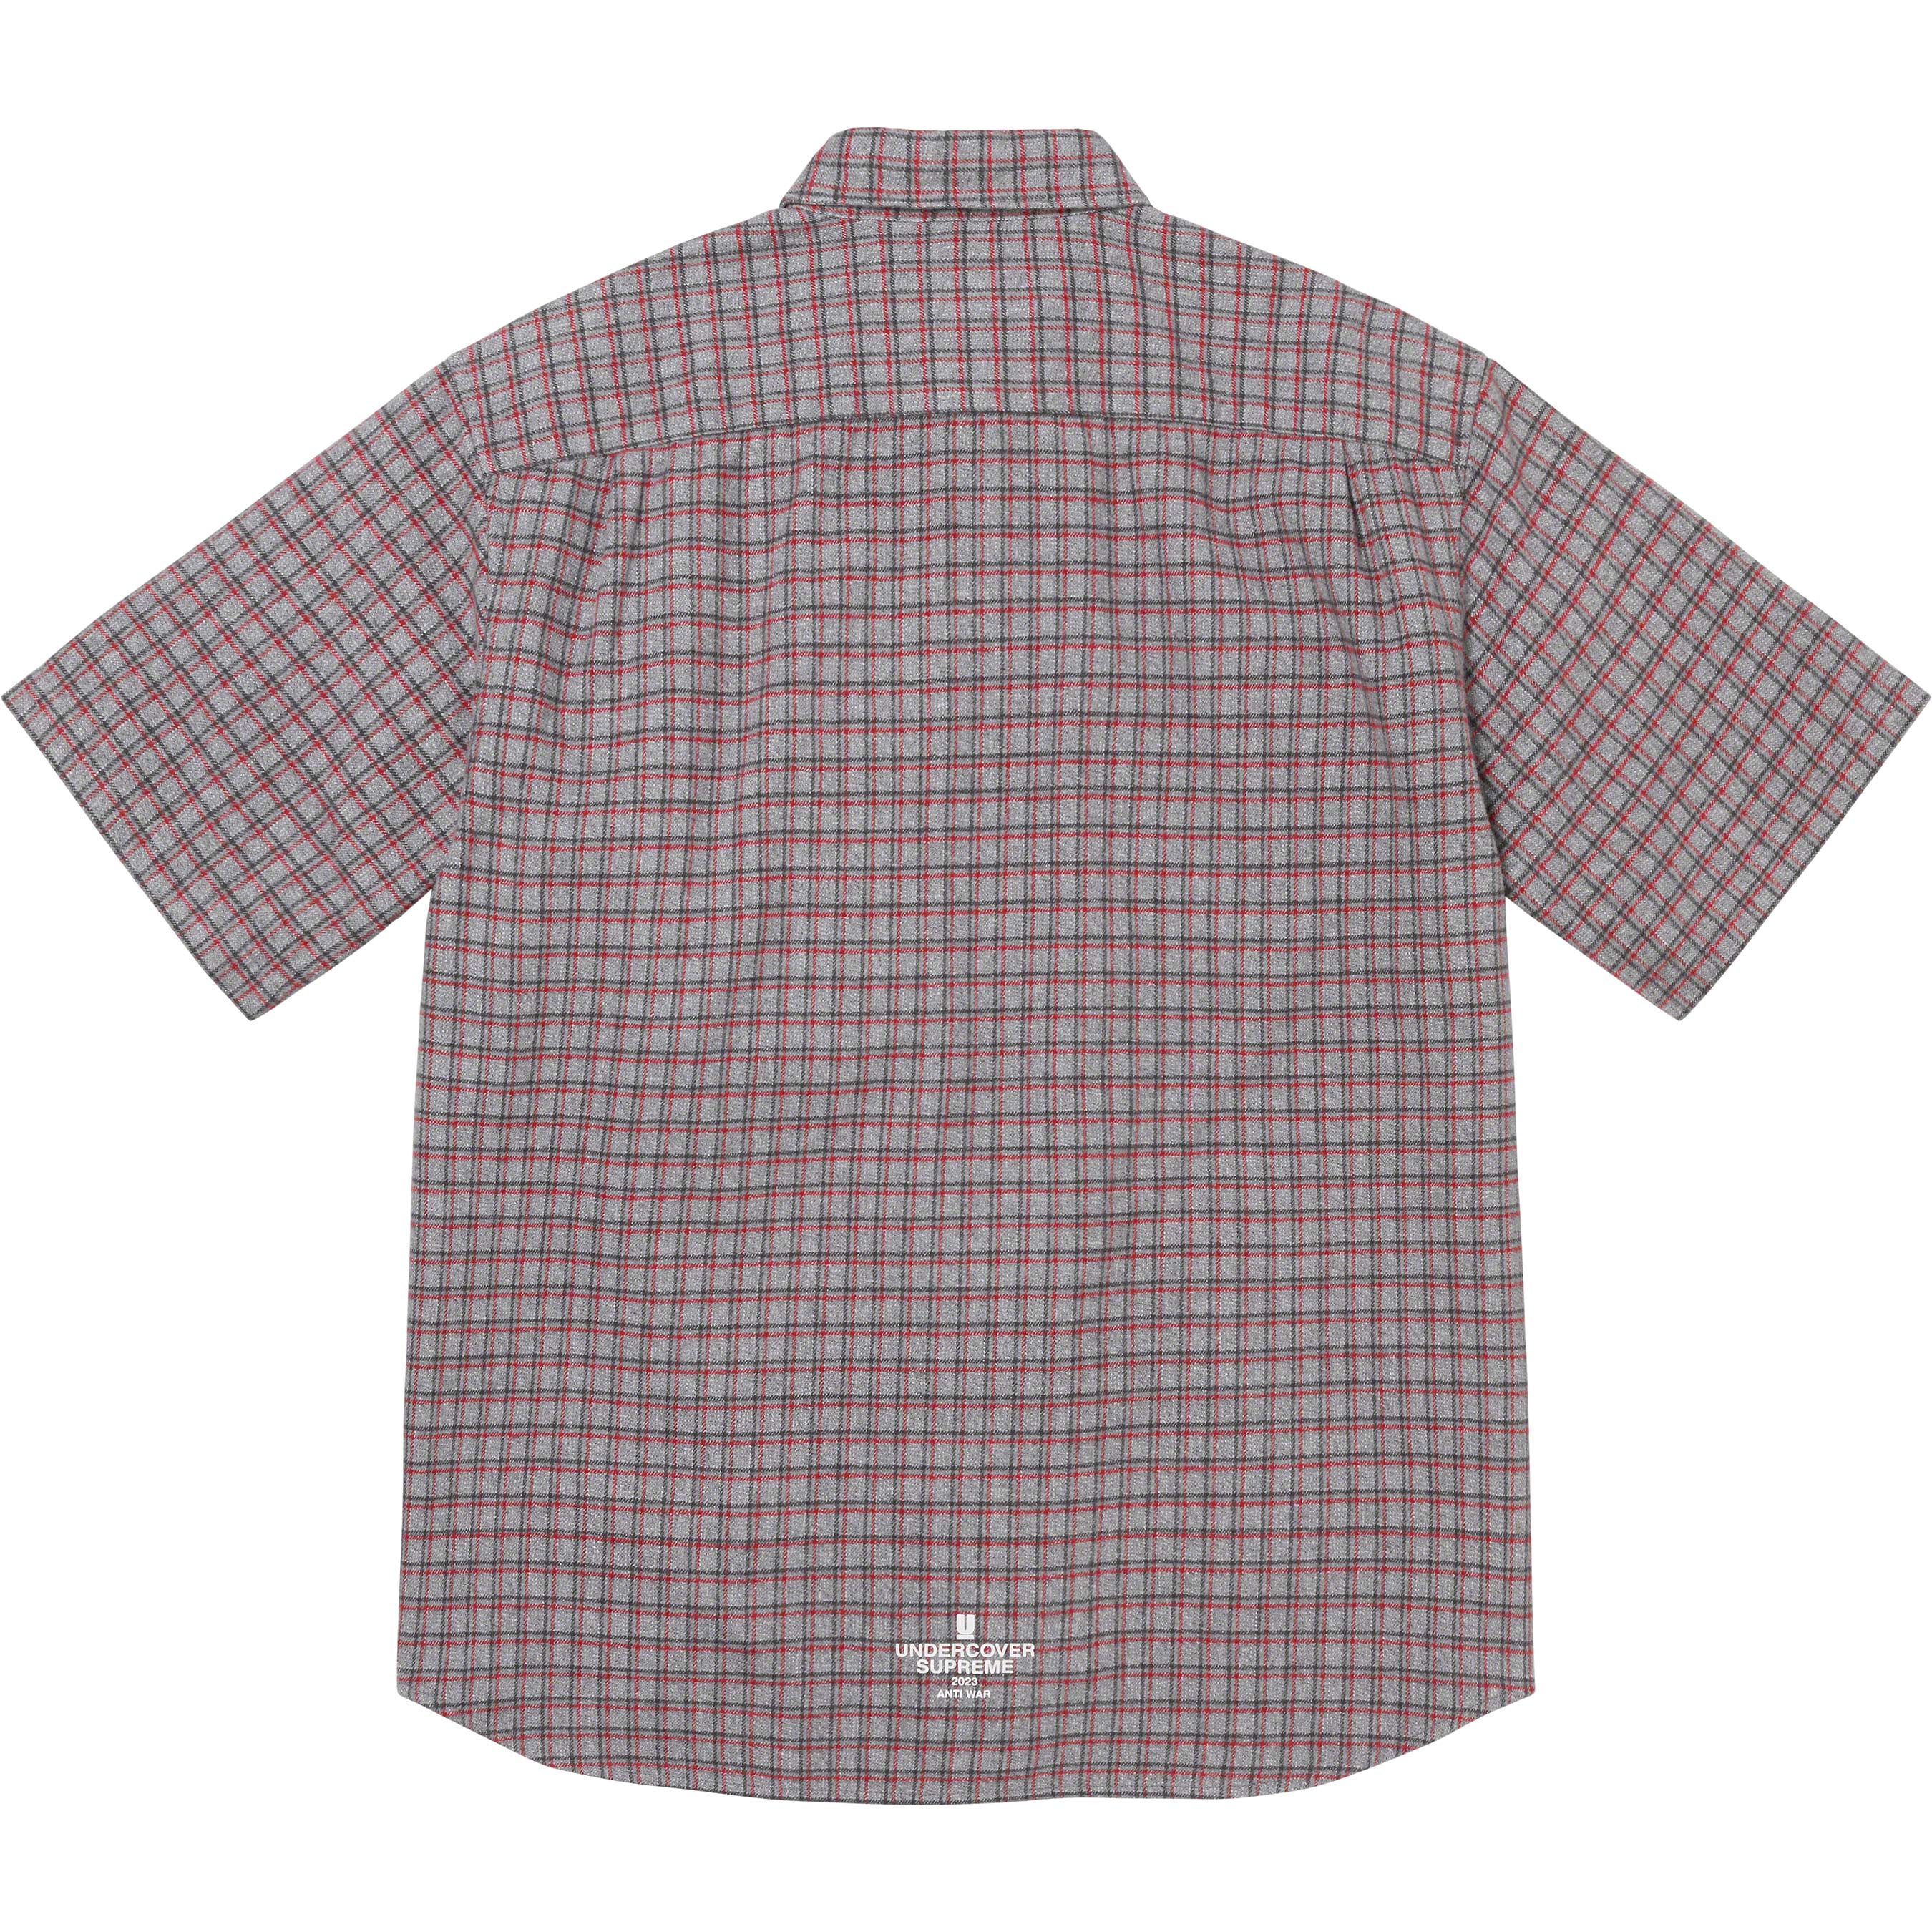 Supreme UNDERCOVER S/S Flannel Shirt Red Plaid L in Hand